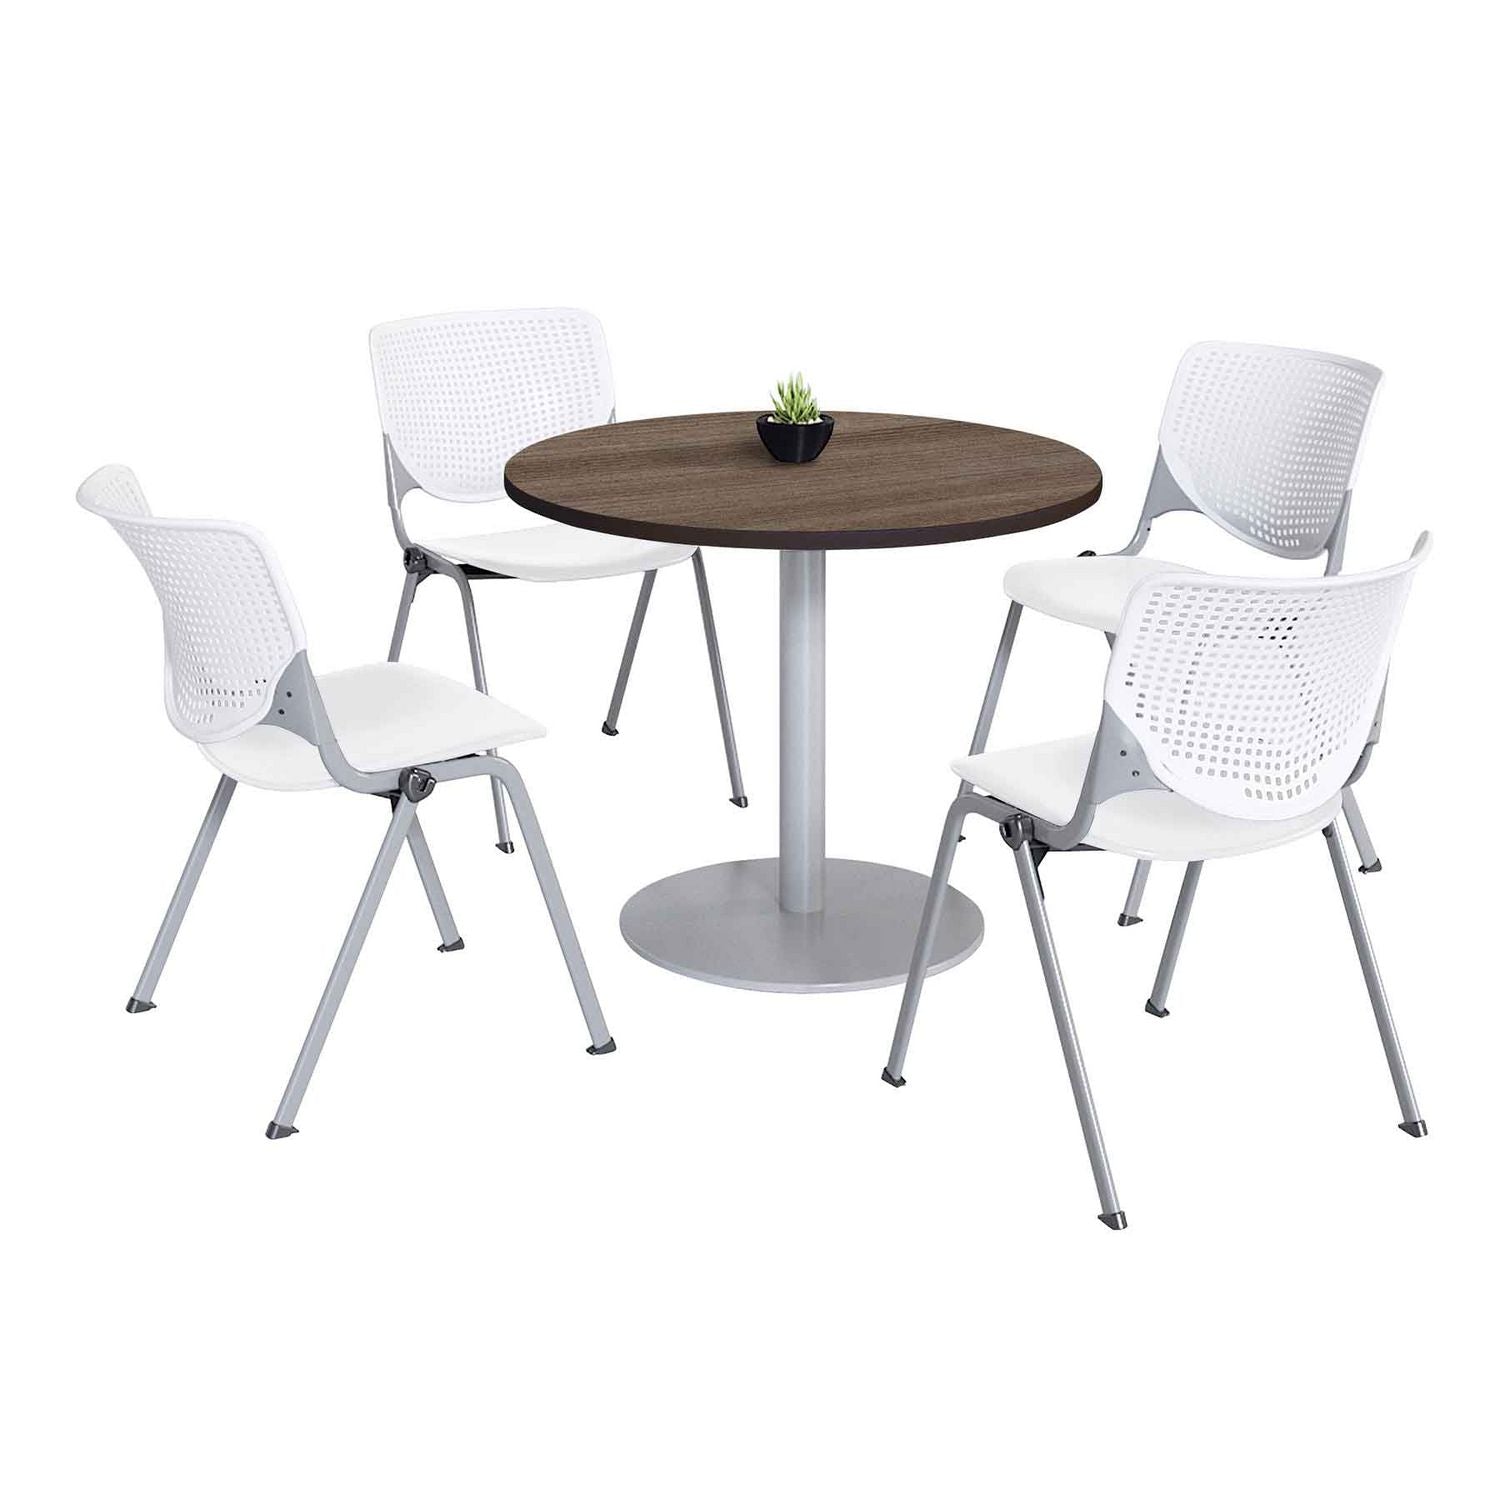 pedestal-table-with-four-white-kool-series-chairs-round-36-dia-x-29h-studio-teak-ships-in-4-6-business-days_kfi811774036887 - 1